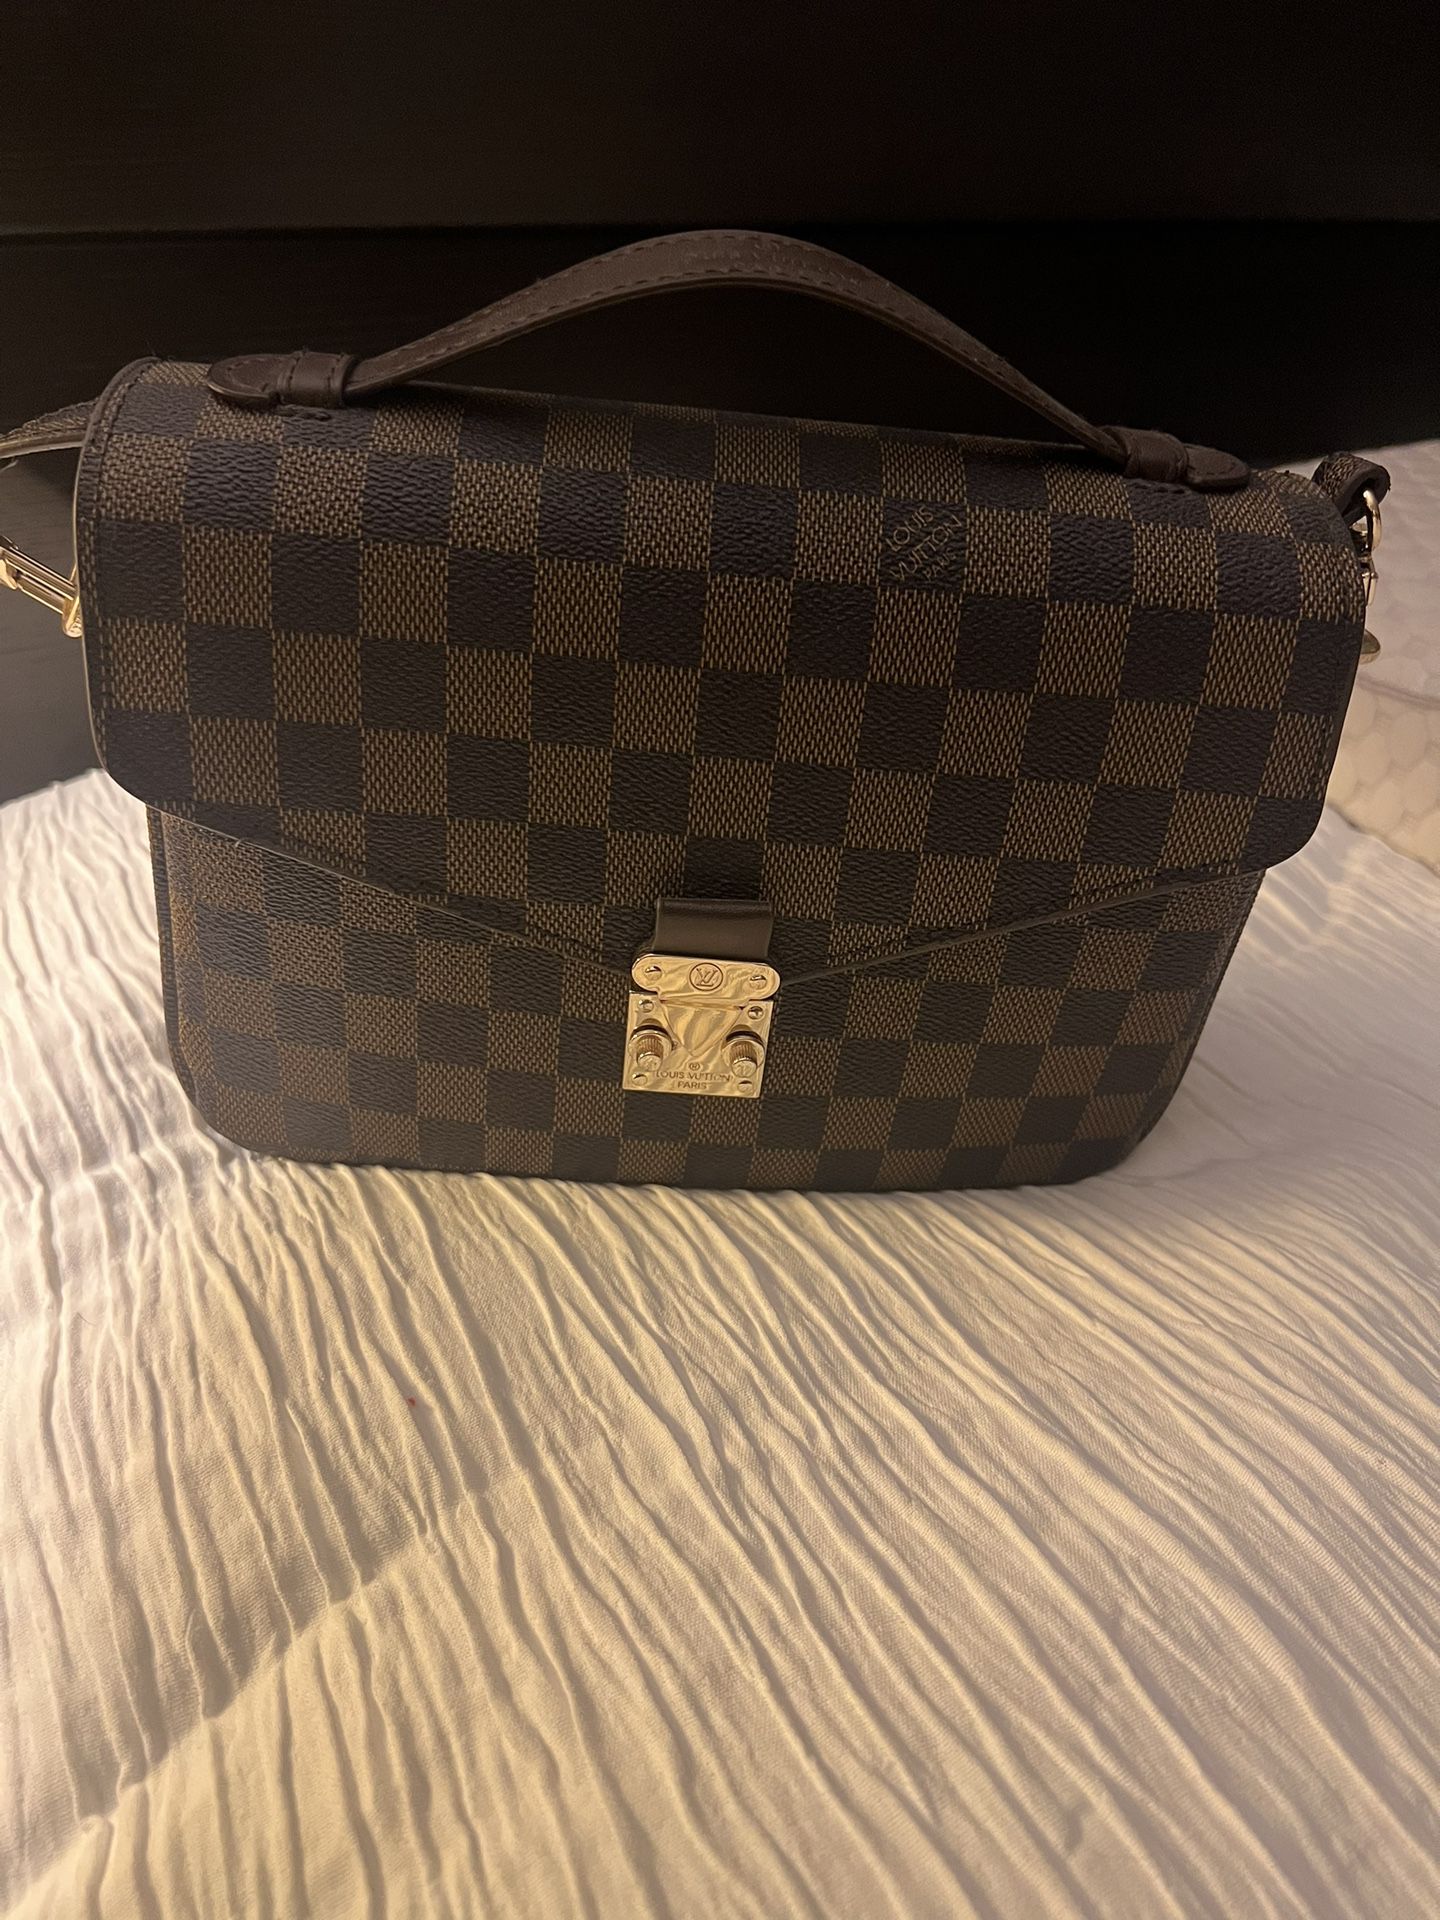 Jet Set Large Logo Crossbody Bag for Sale in Willoughby Hills, OH - OfferUp